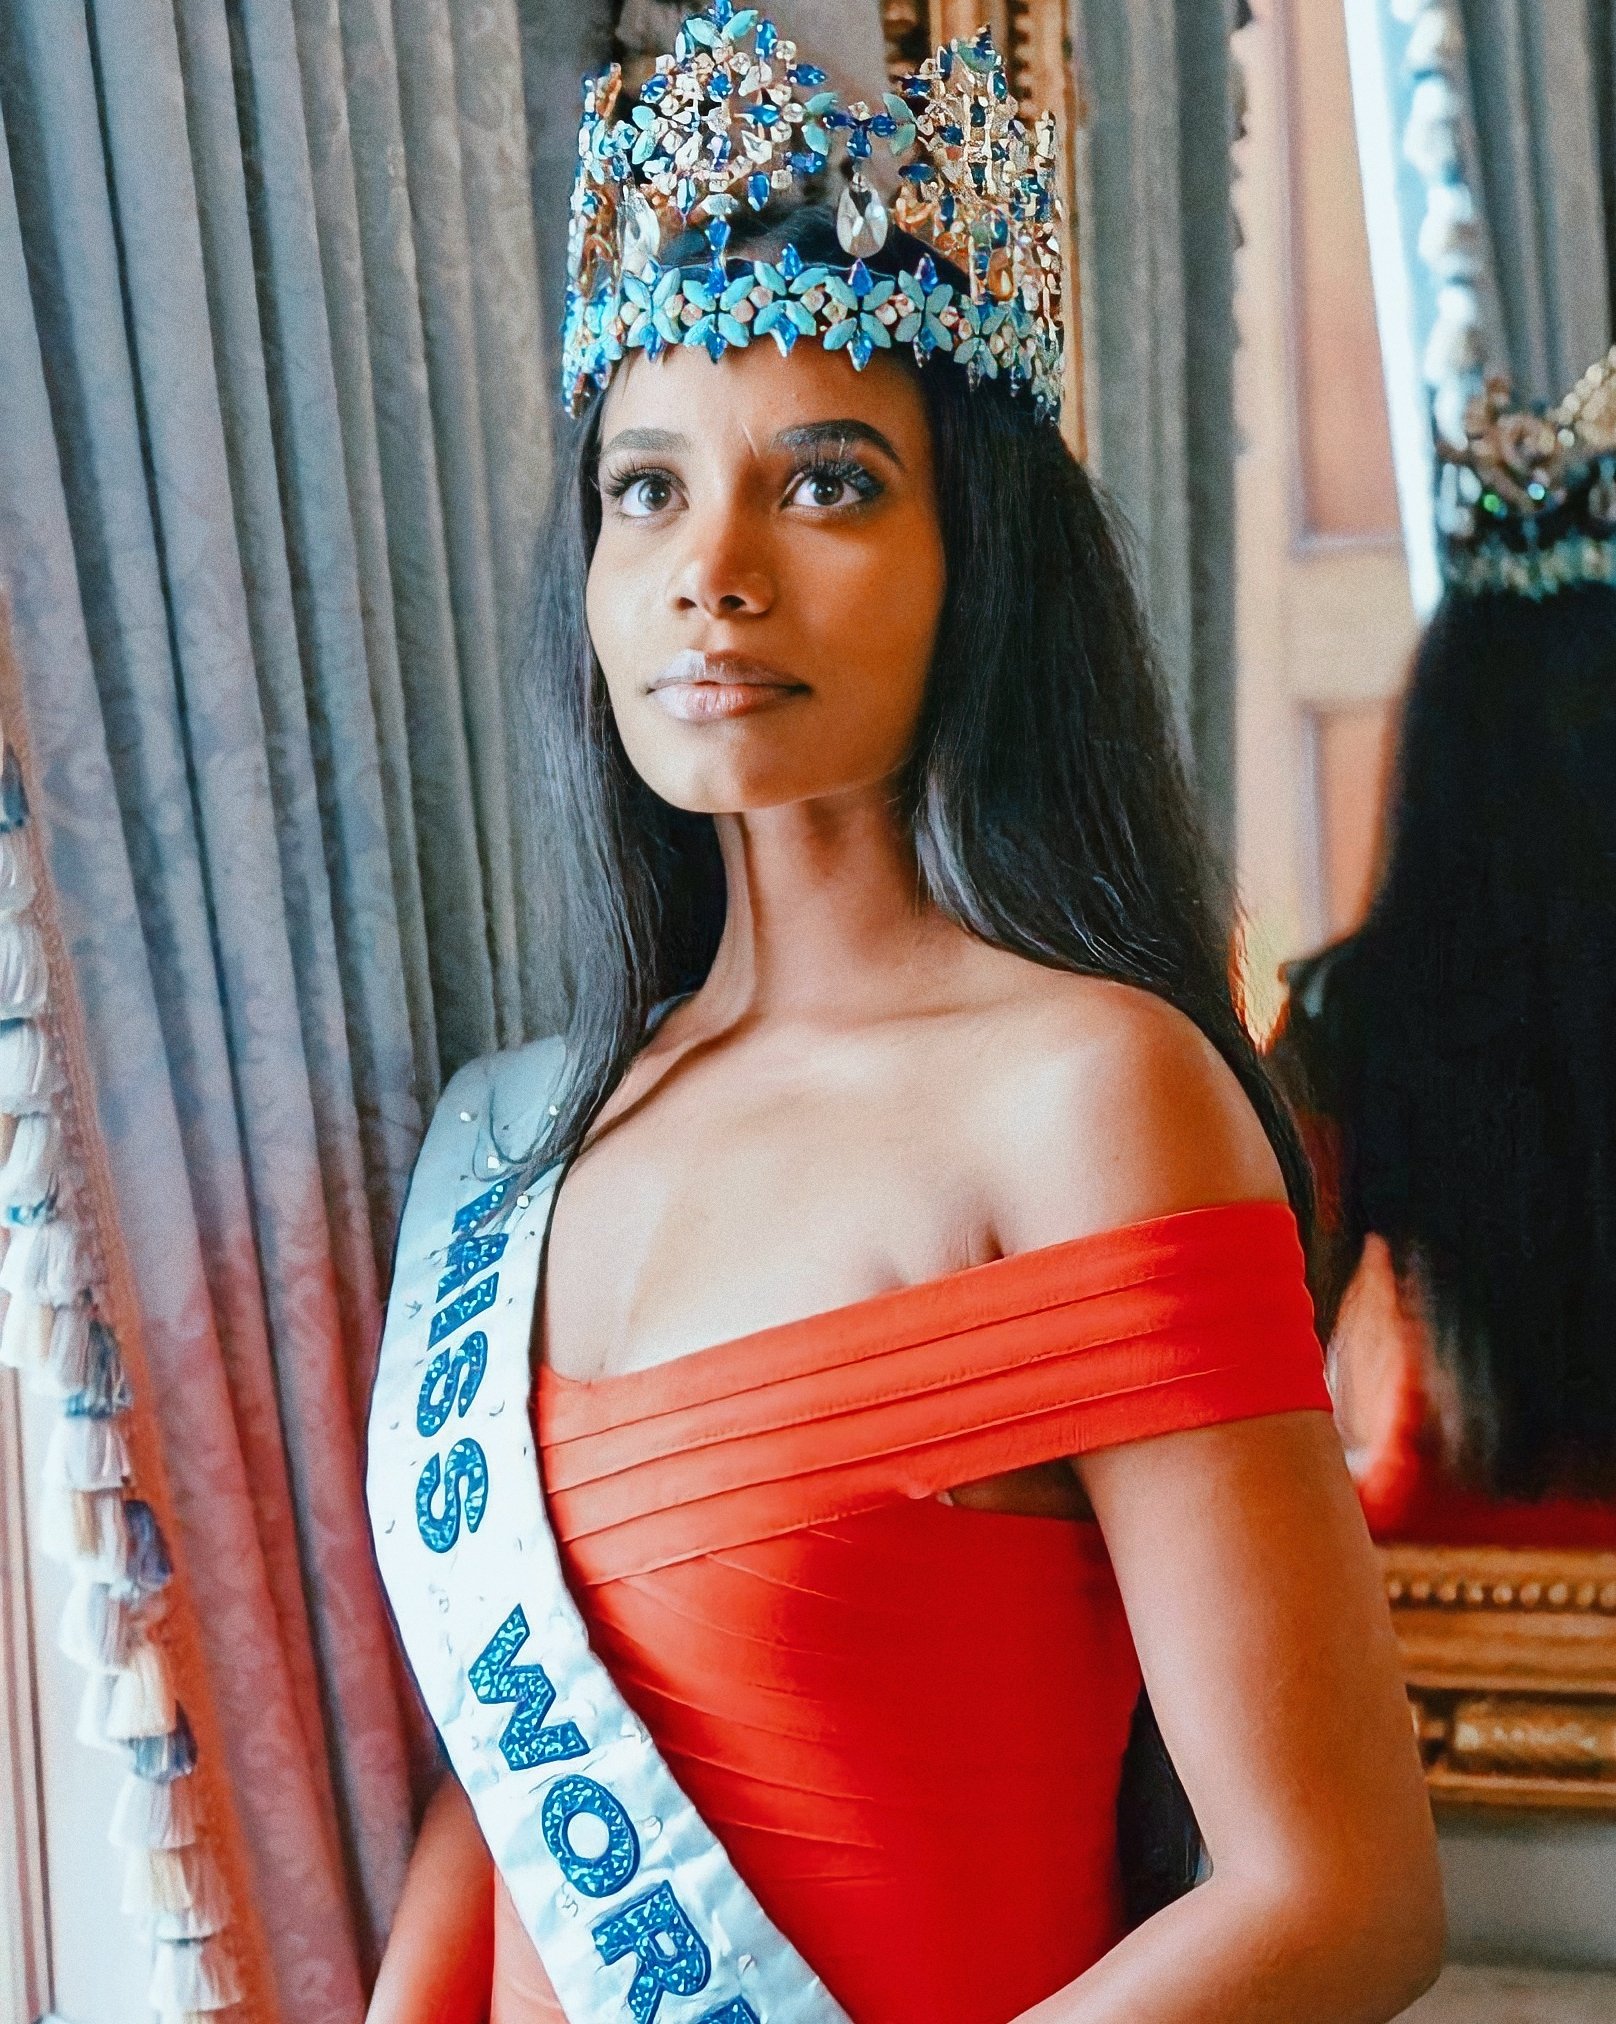 Official Thread of Miss World 2019 ® Toni-Ann Singh - JAMAICA - Page 4 E2m50hVVUAUkENy?format=jpg&name=large